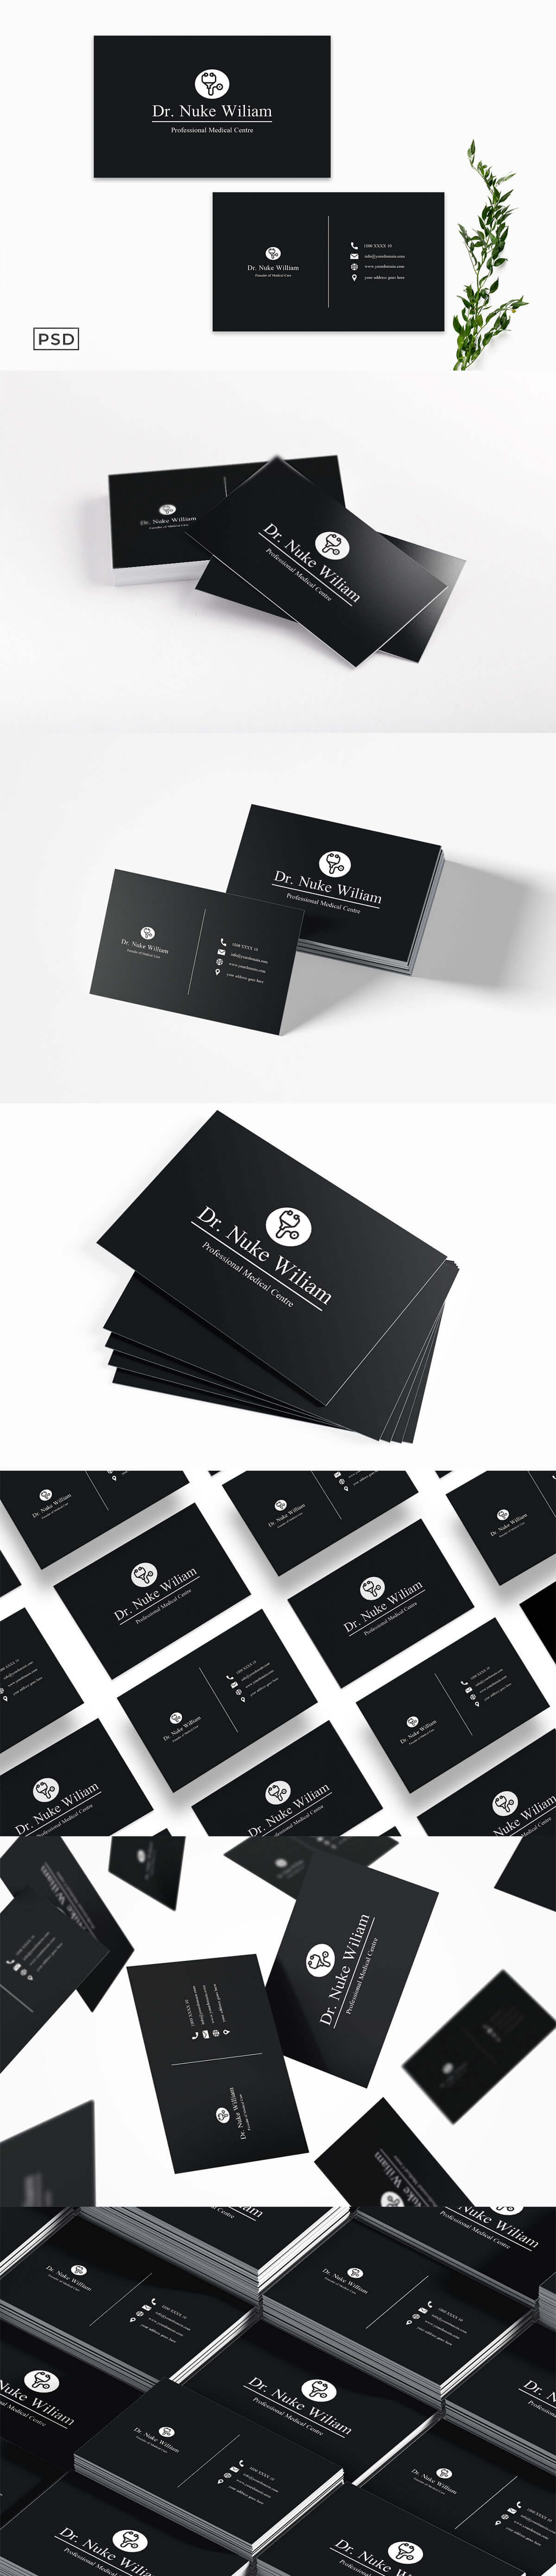 Free Medical Business Card Template V2